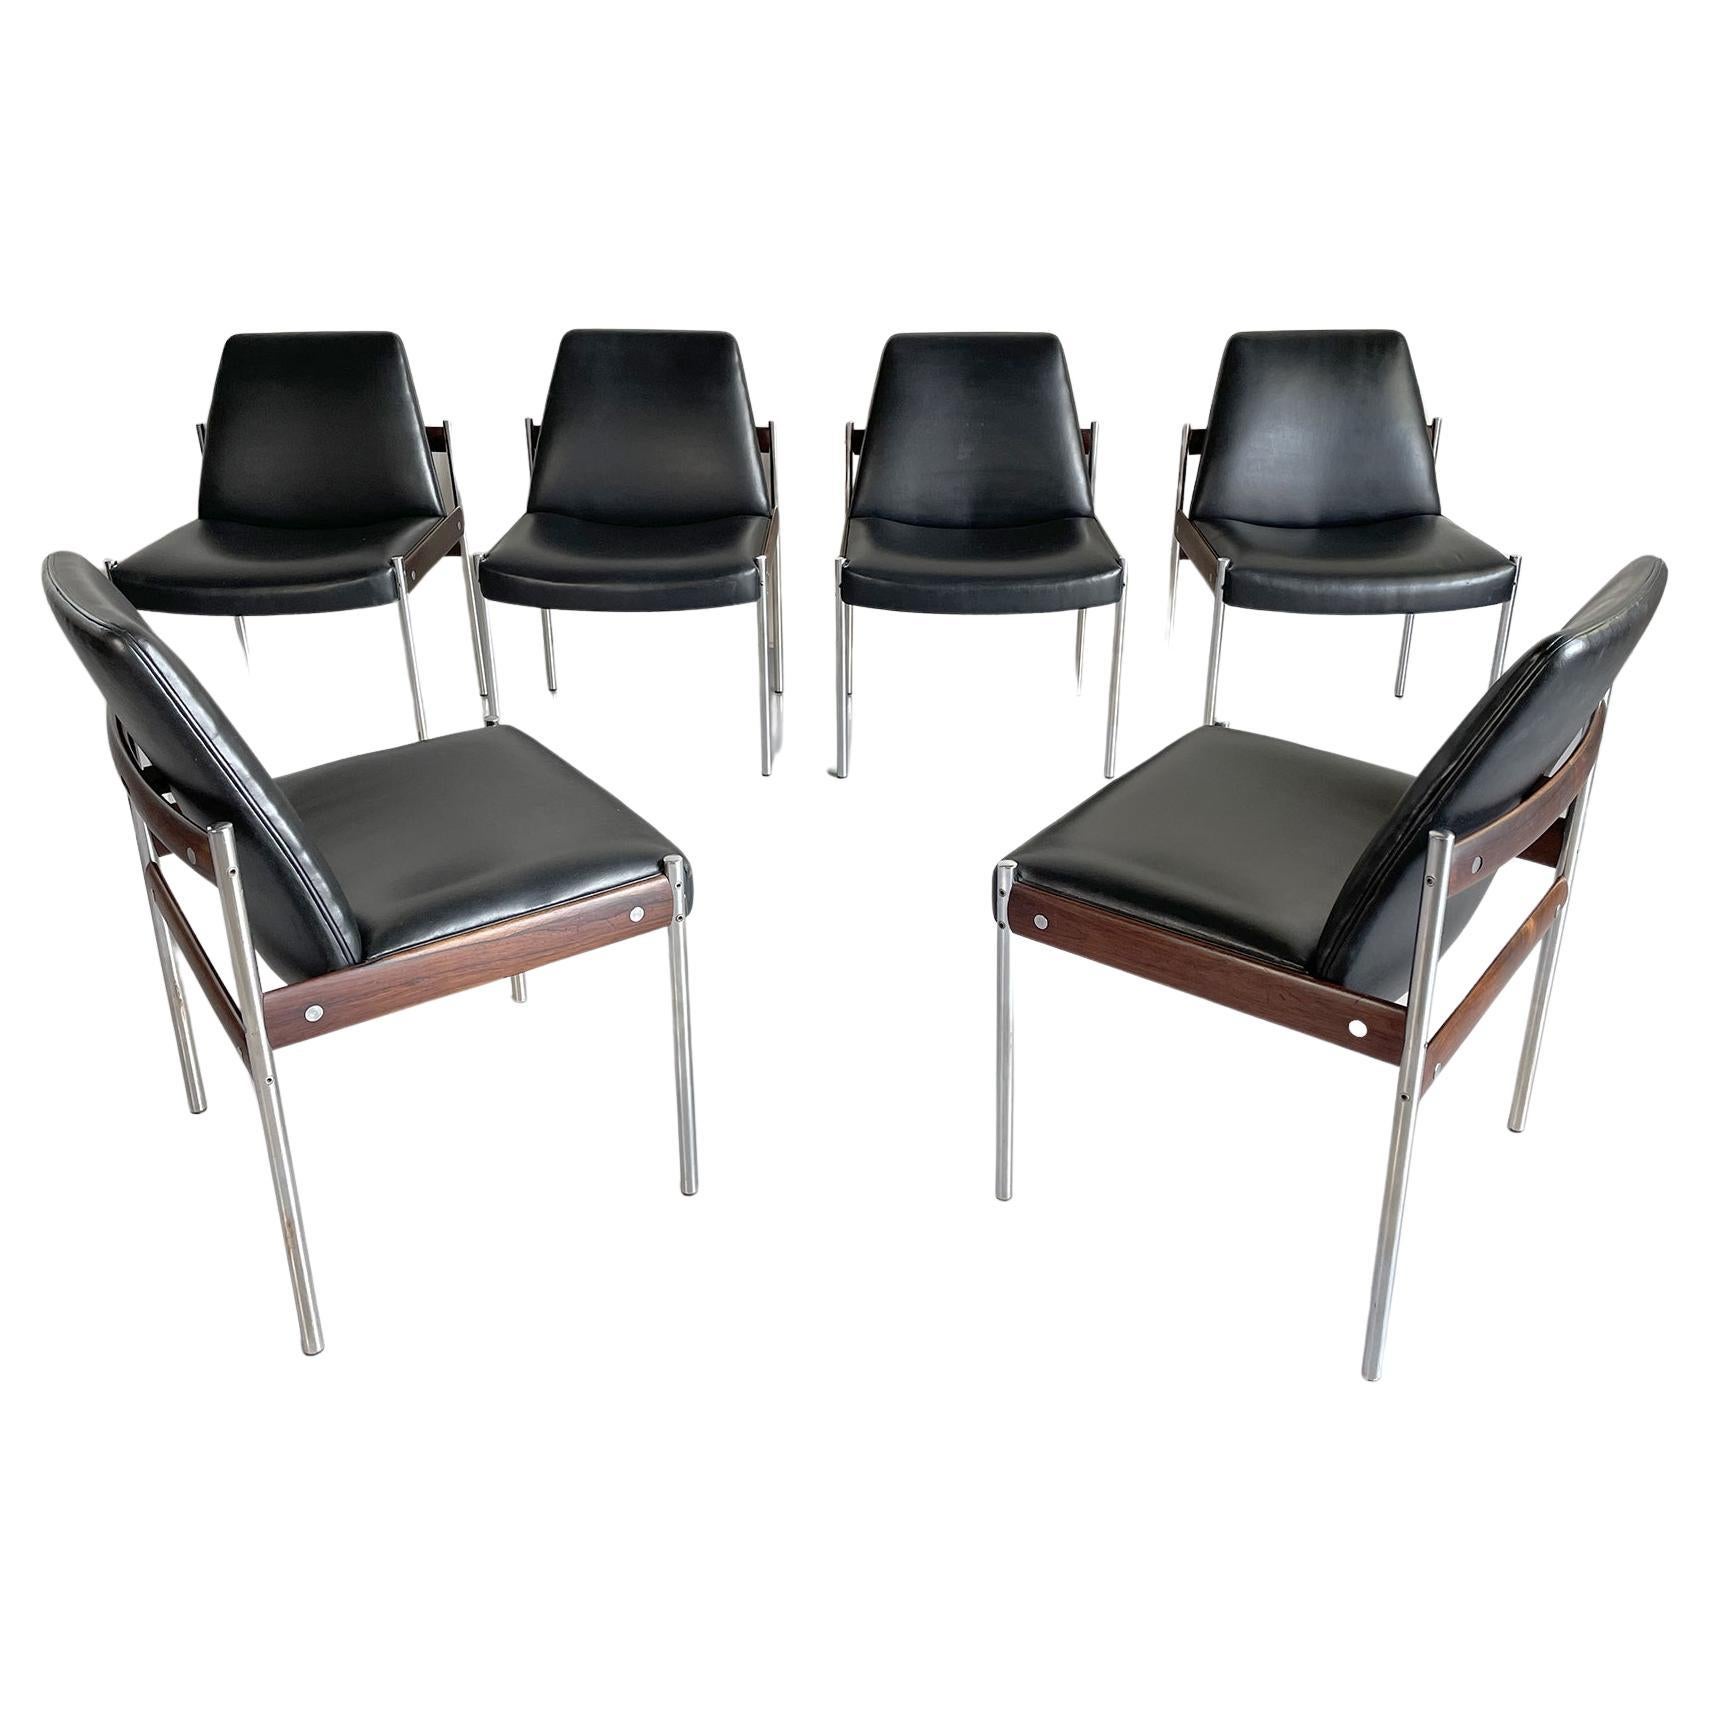 Sven Ivar Dysthe, Series of 6 "3001" Chairs, Norway 1960